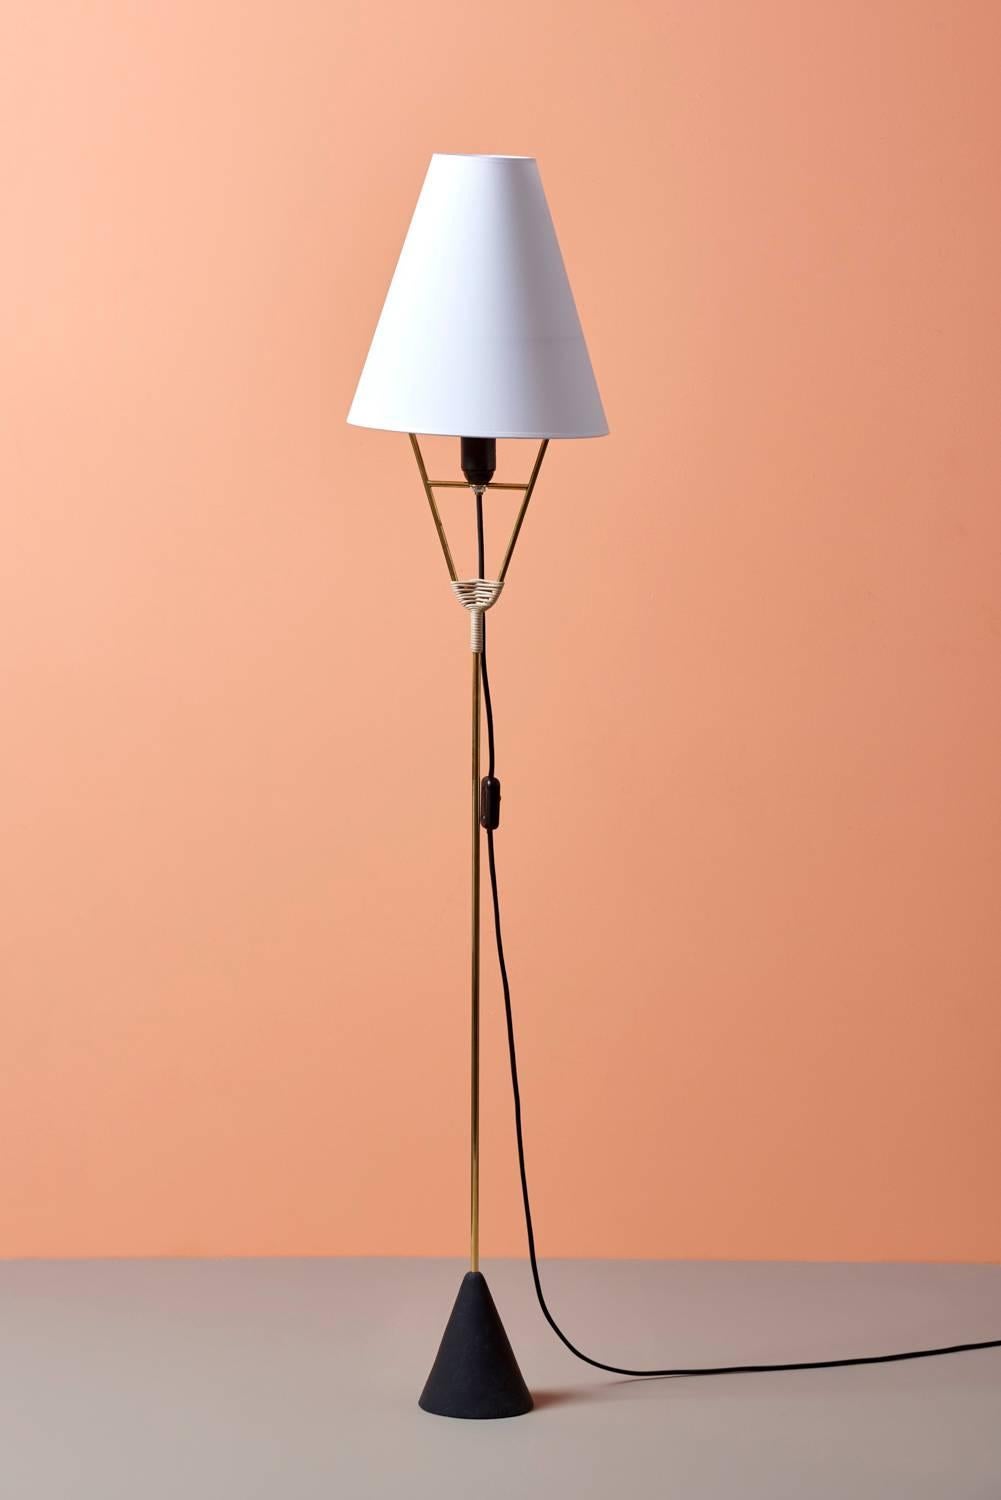 Vice versa lamp #4105 by Carl Auböck in brass, cane detail and painted metal.

